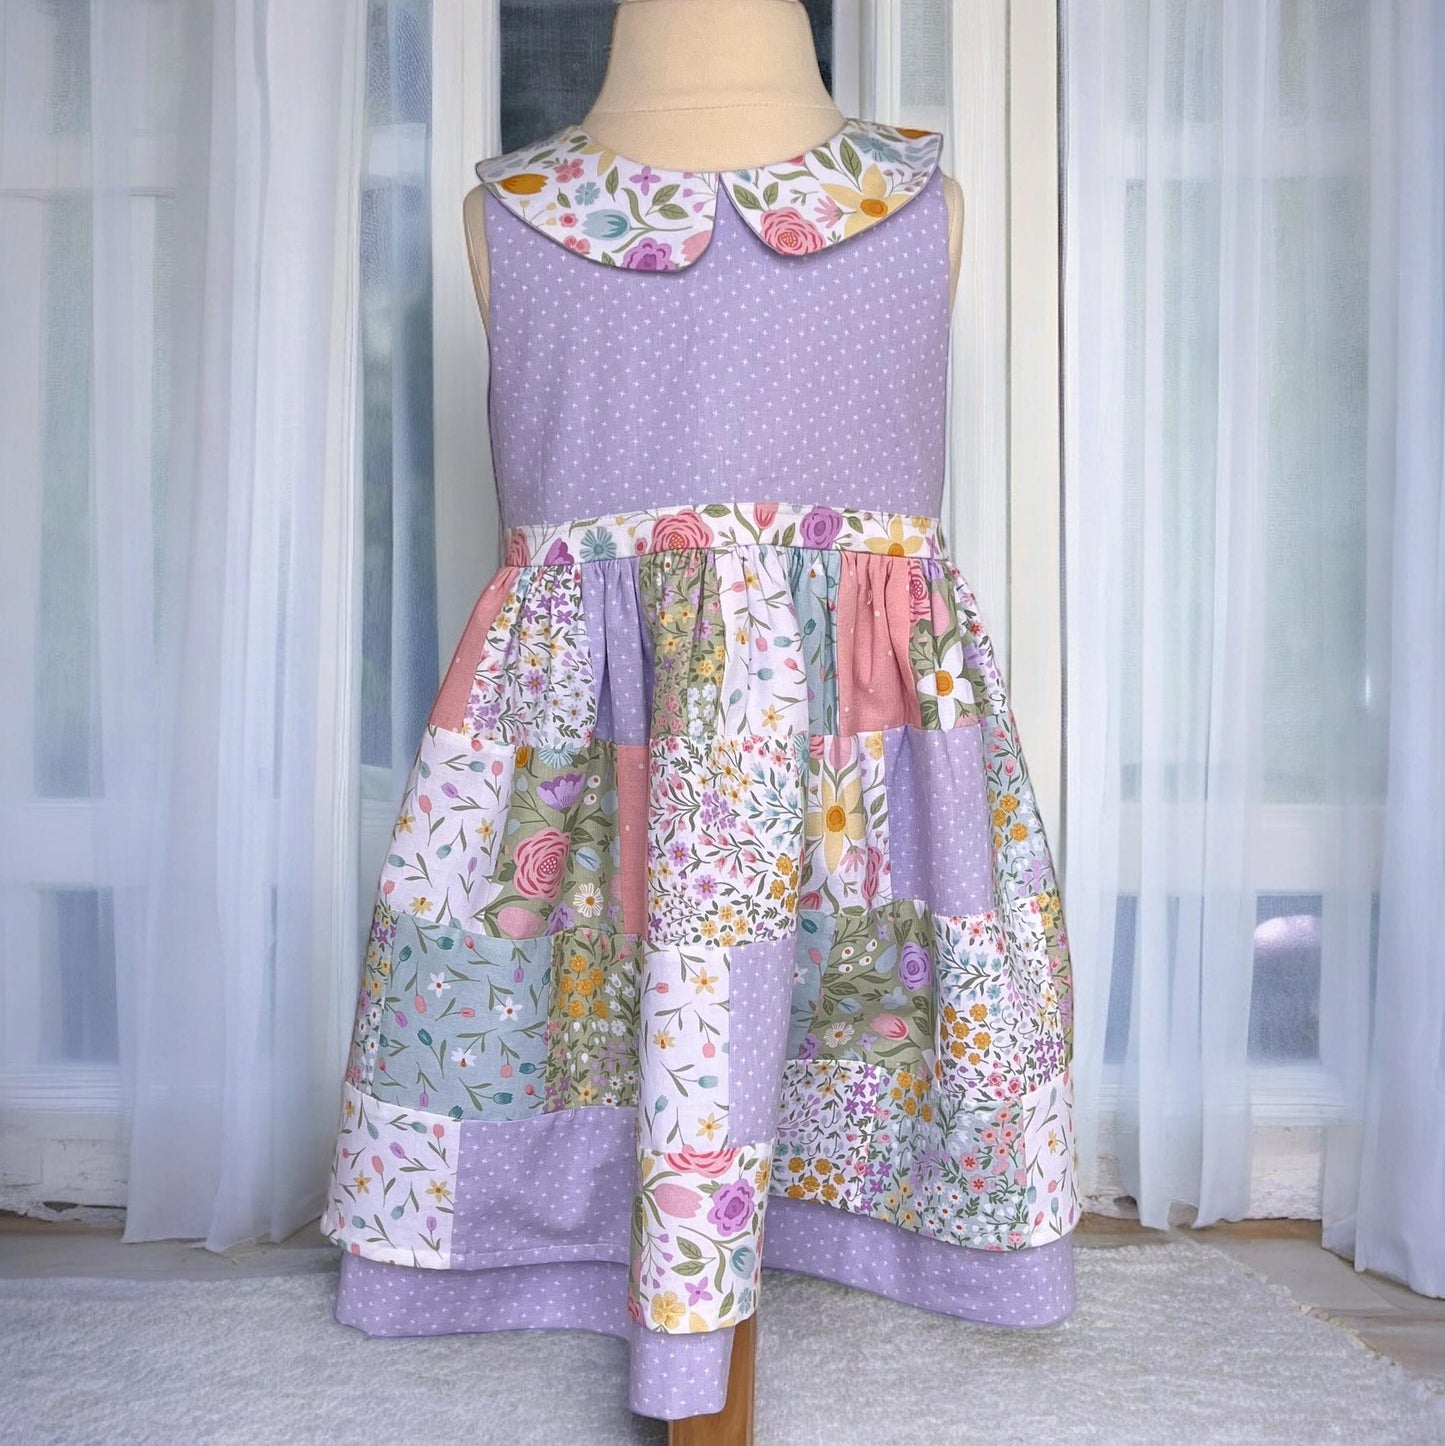 Spring Garden - Size 5 Patchwork Dress with purple polka dots - perfect for spring. Free Shipping